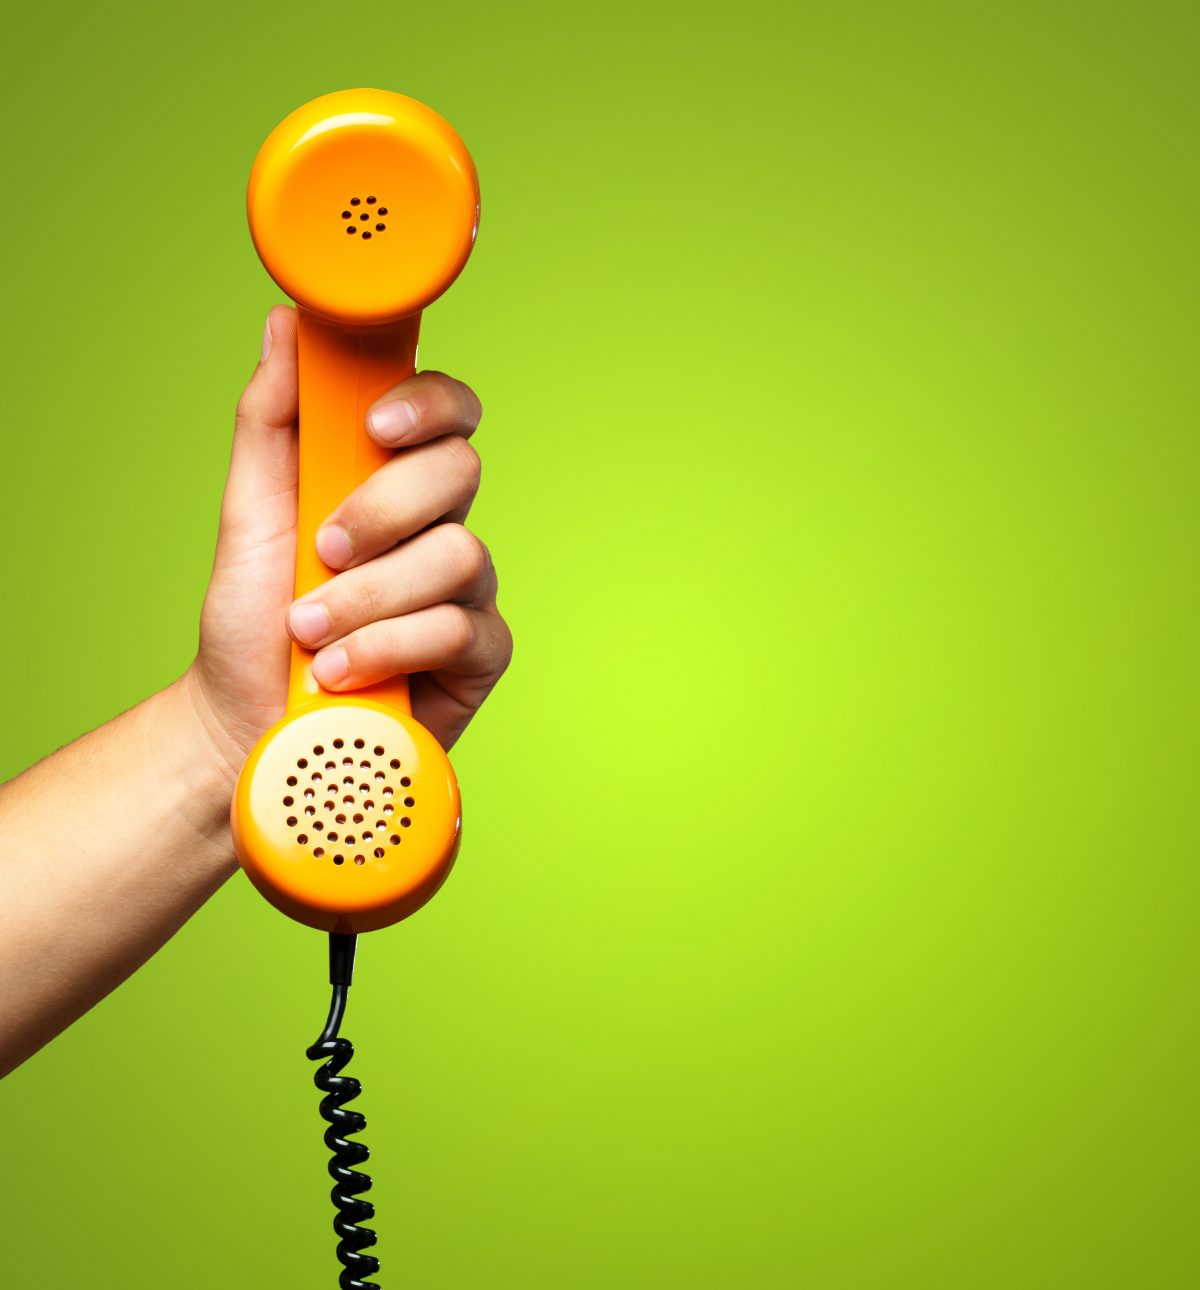 Area Code, Prefix, & Other Parts of a Phone Number